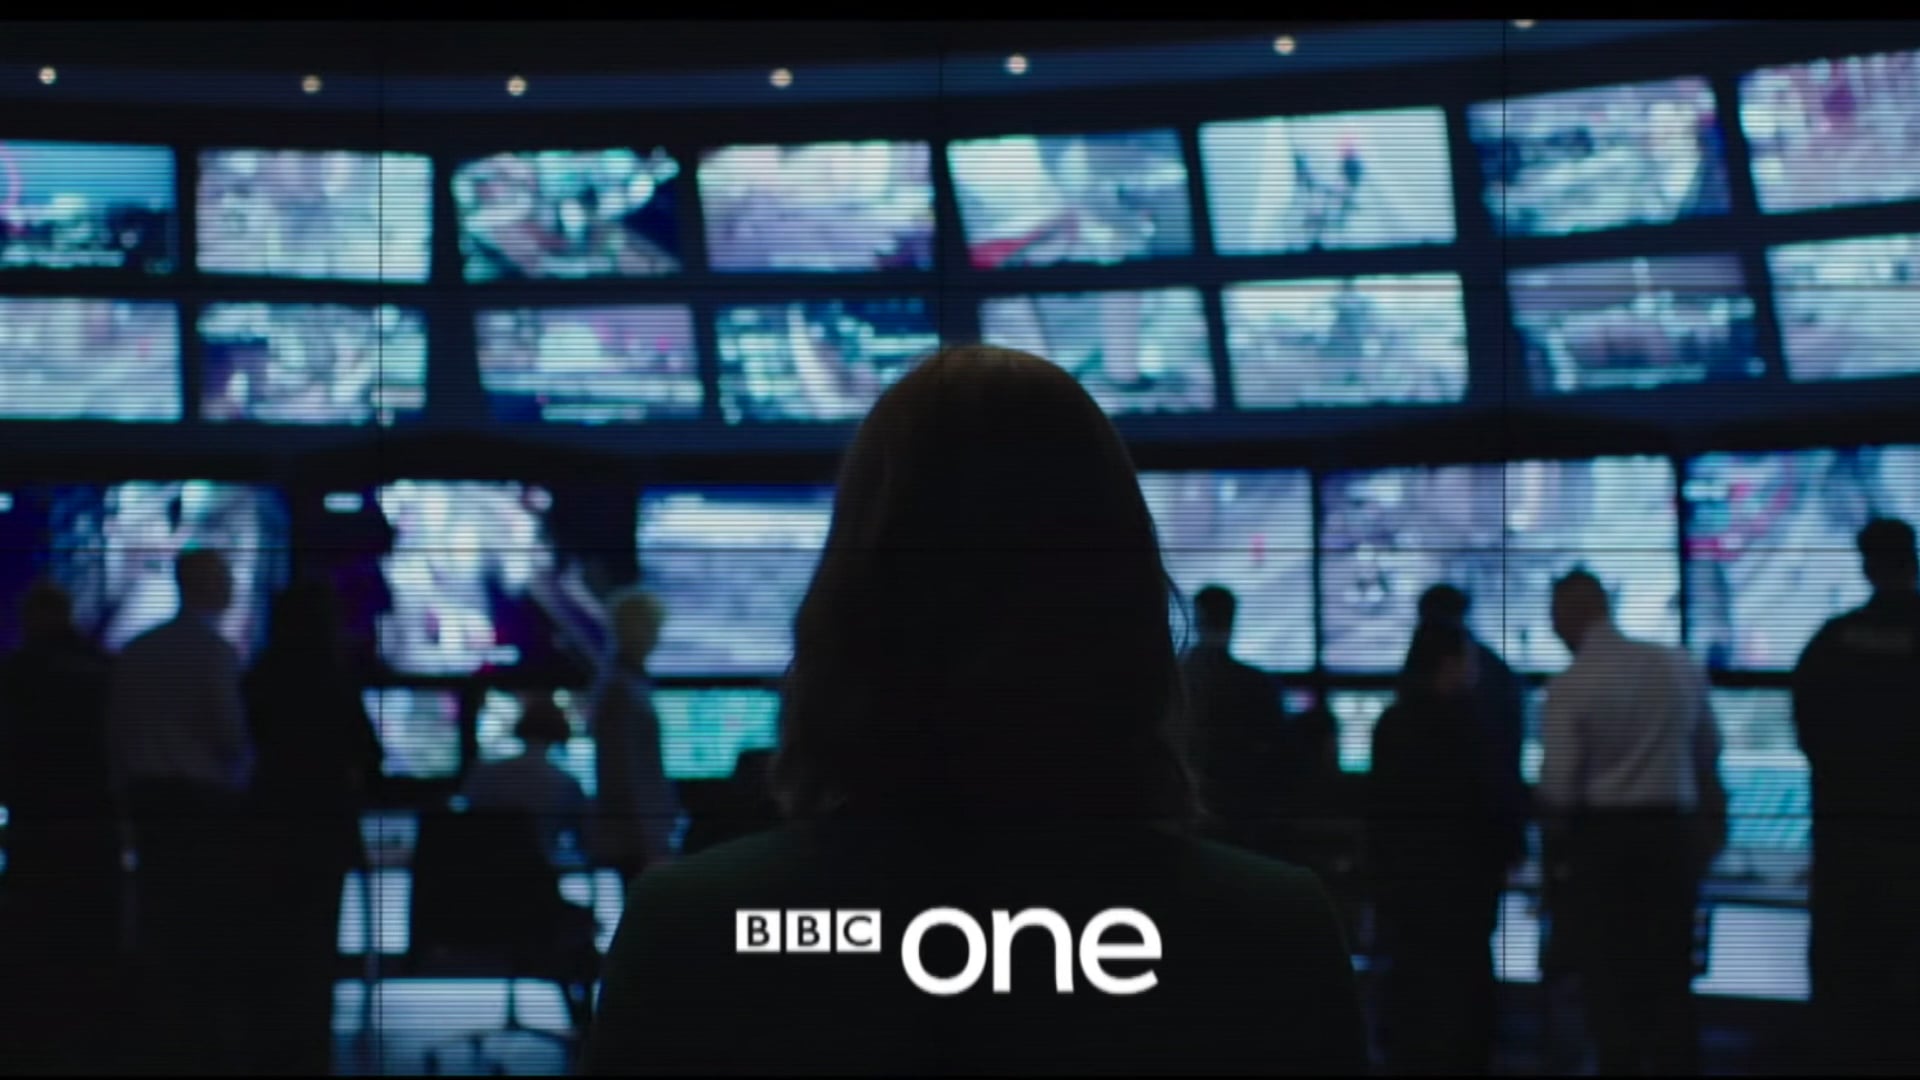 THE CAPTURE Trailer (BBC one)